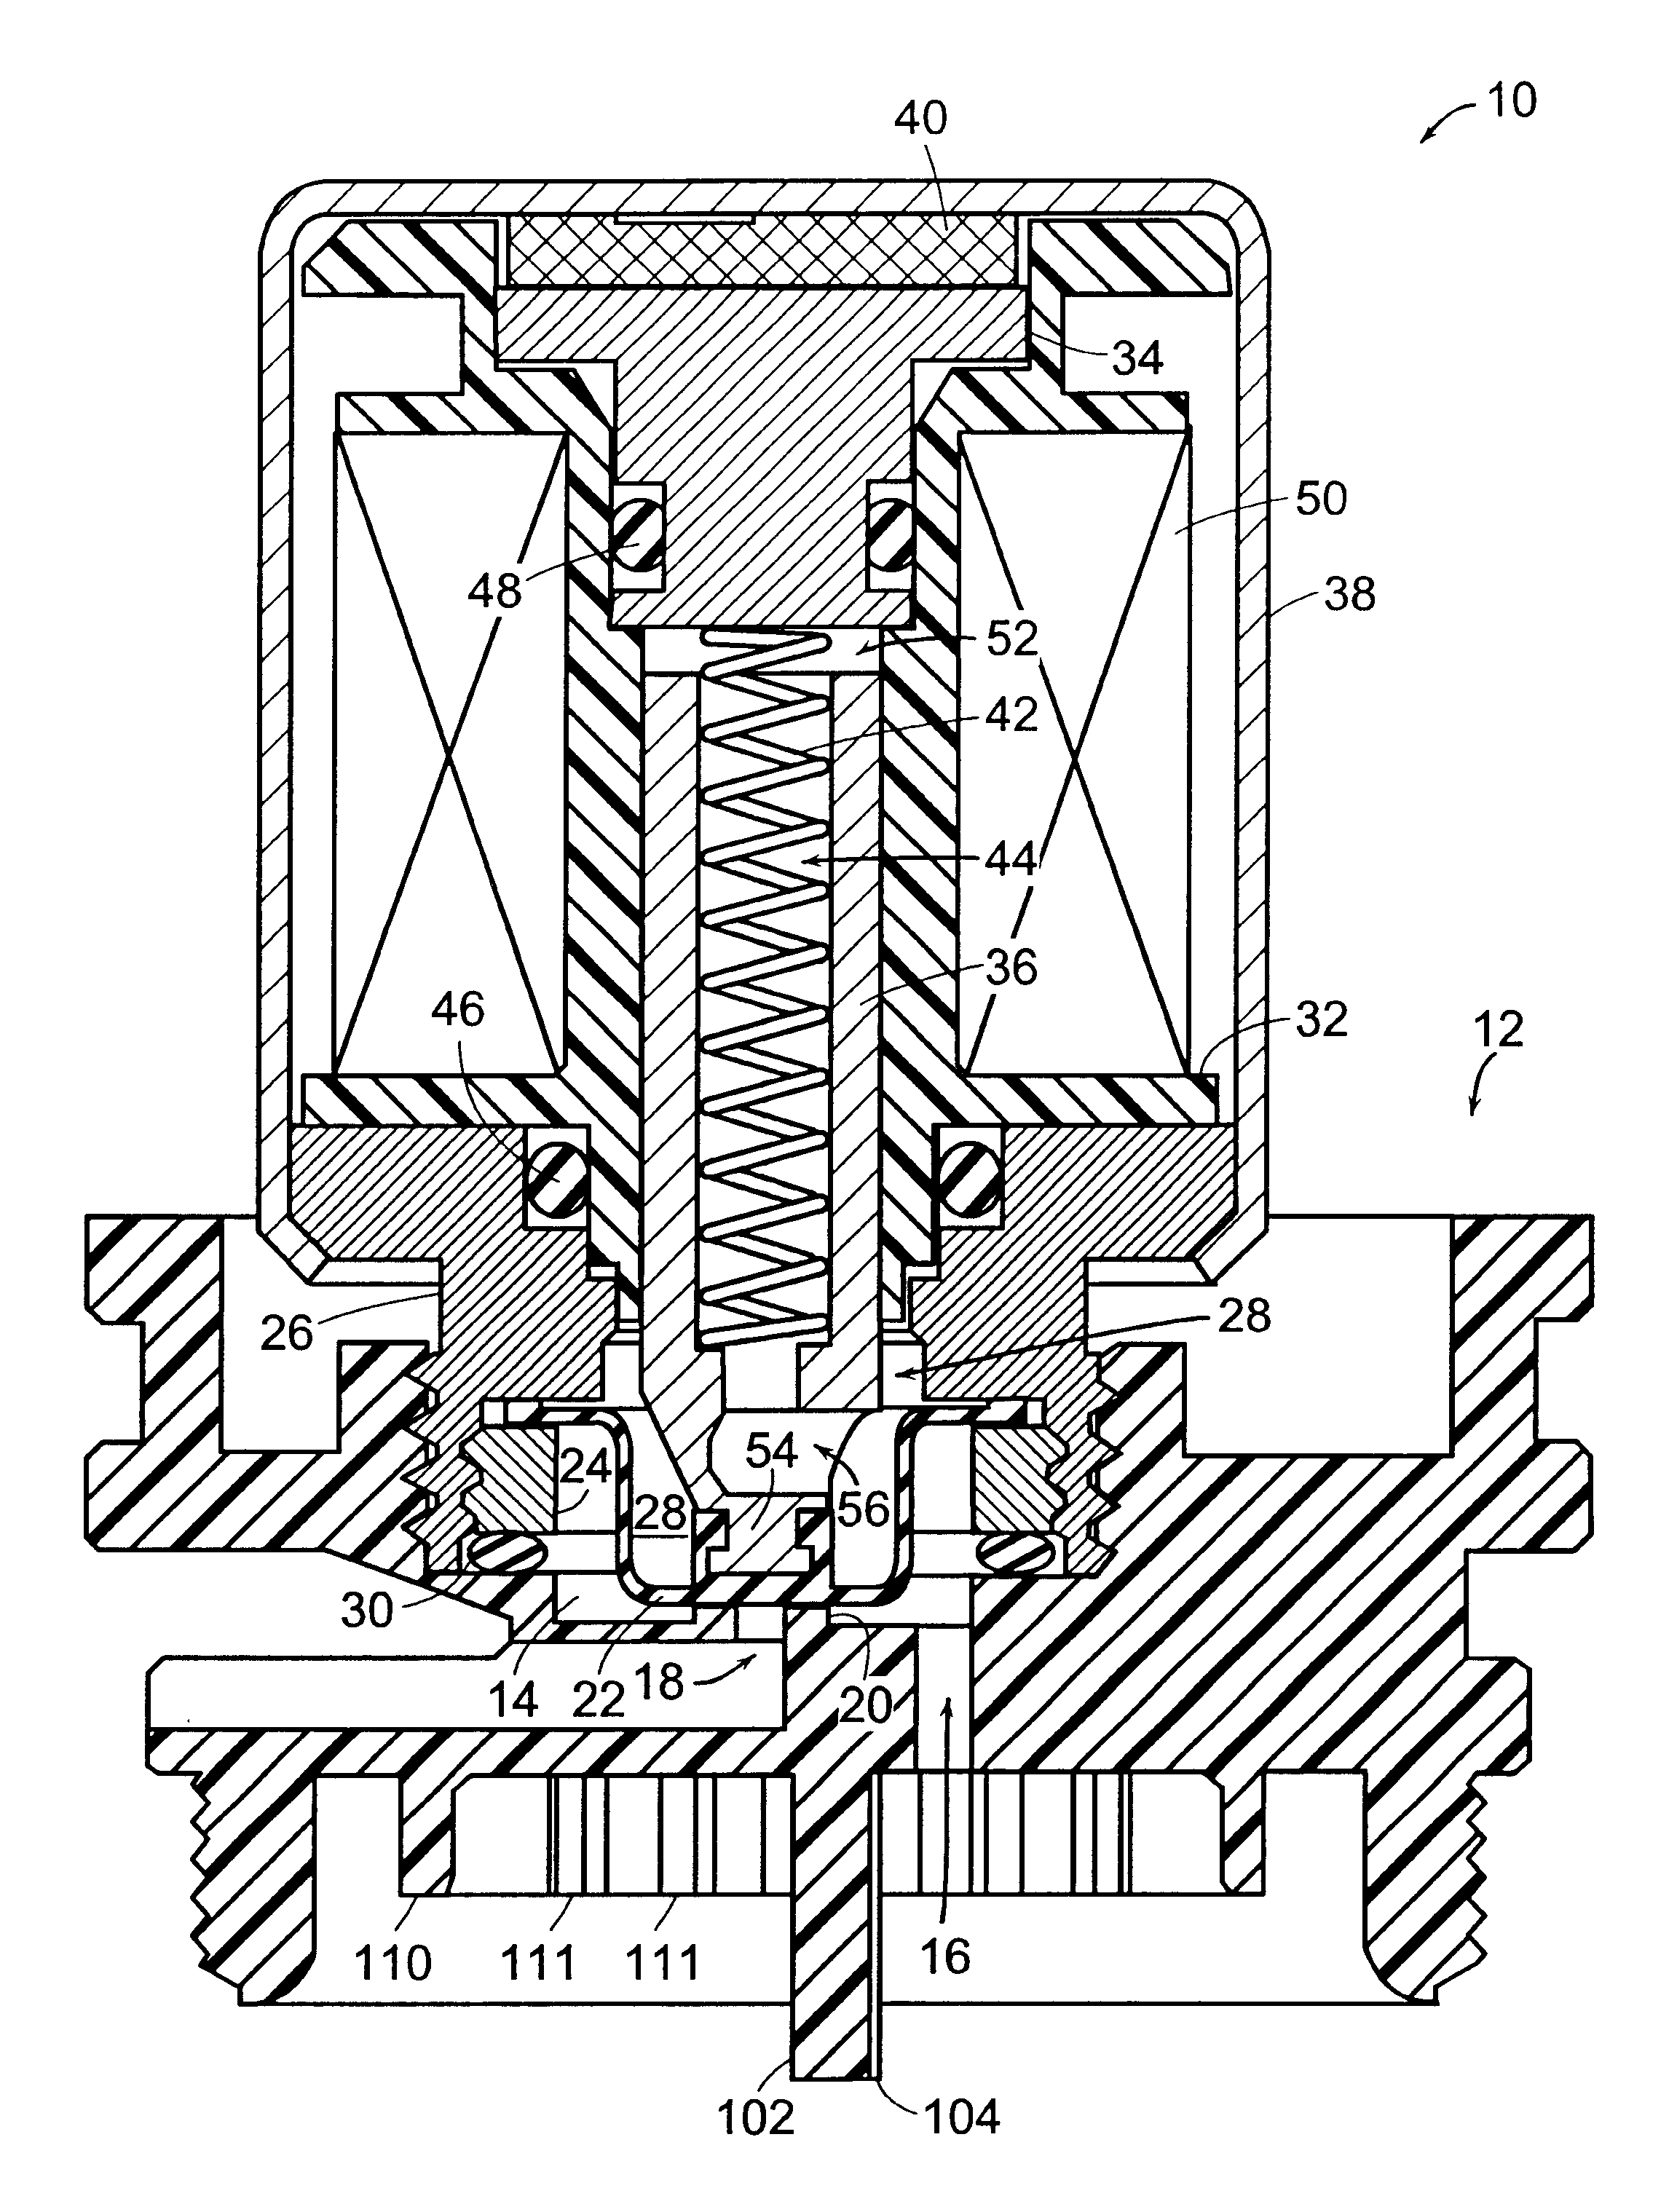 Valve actuator having small isolated plunger